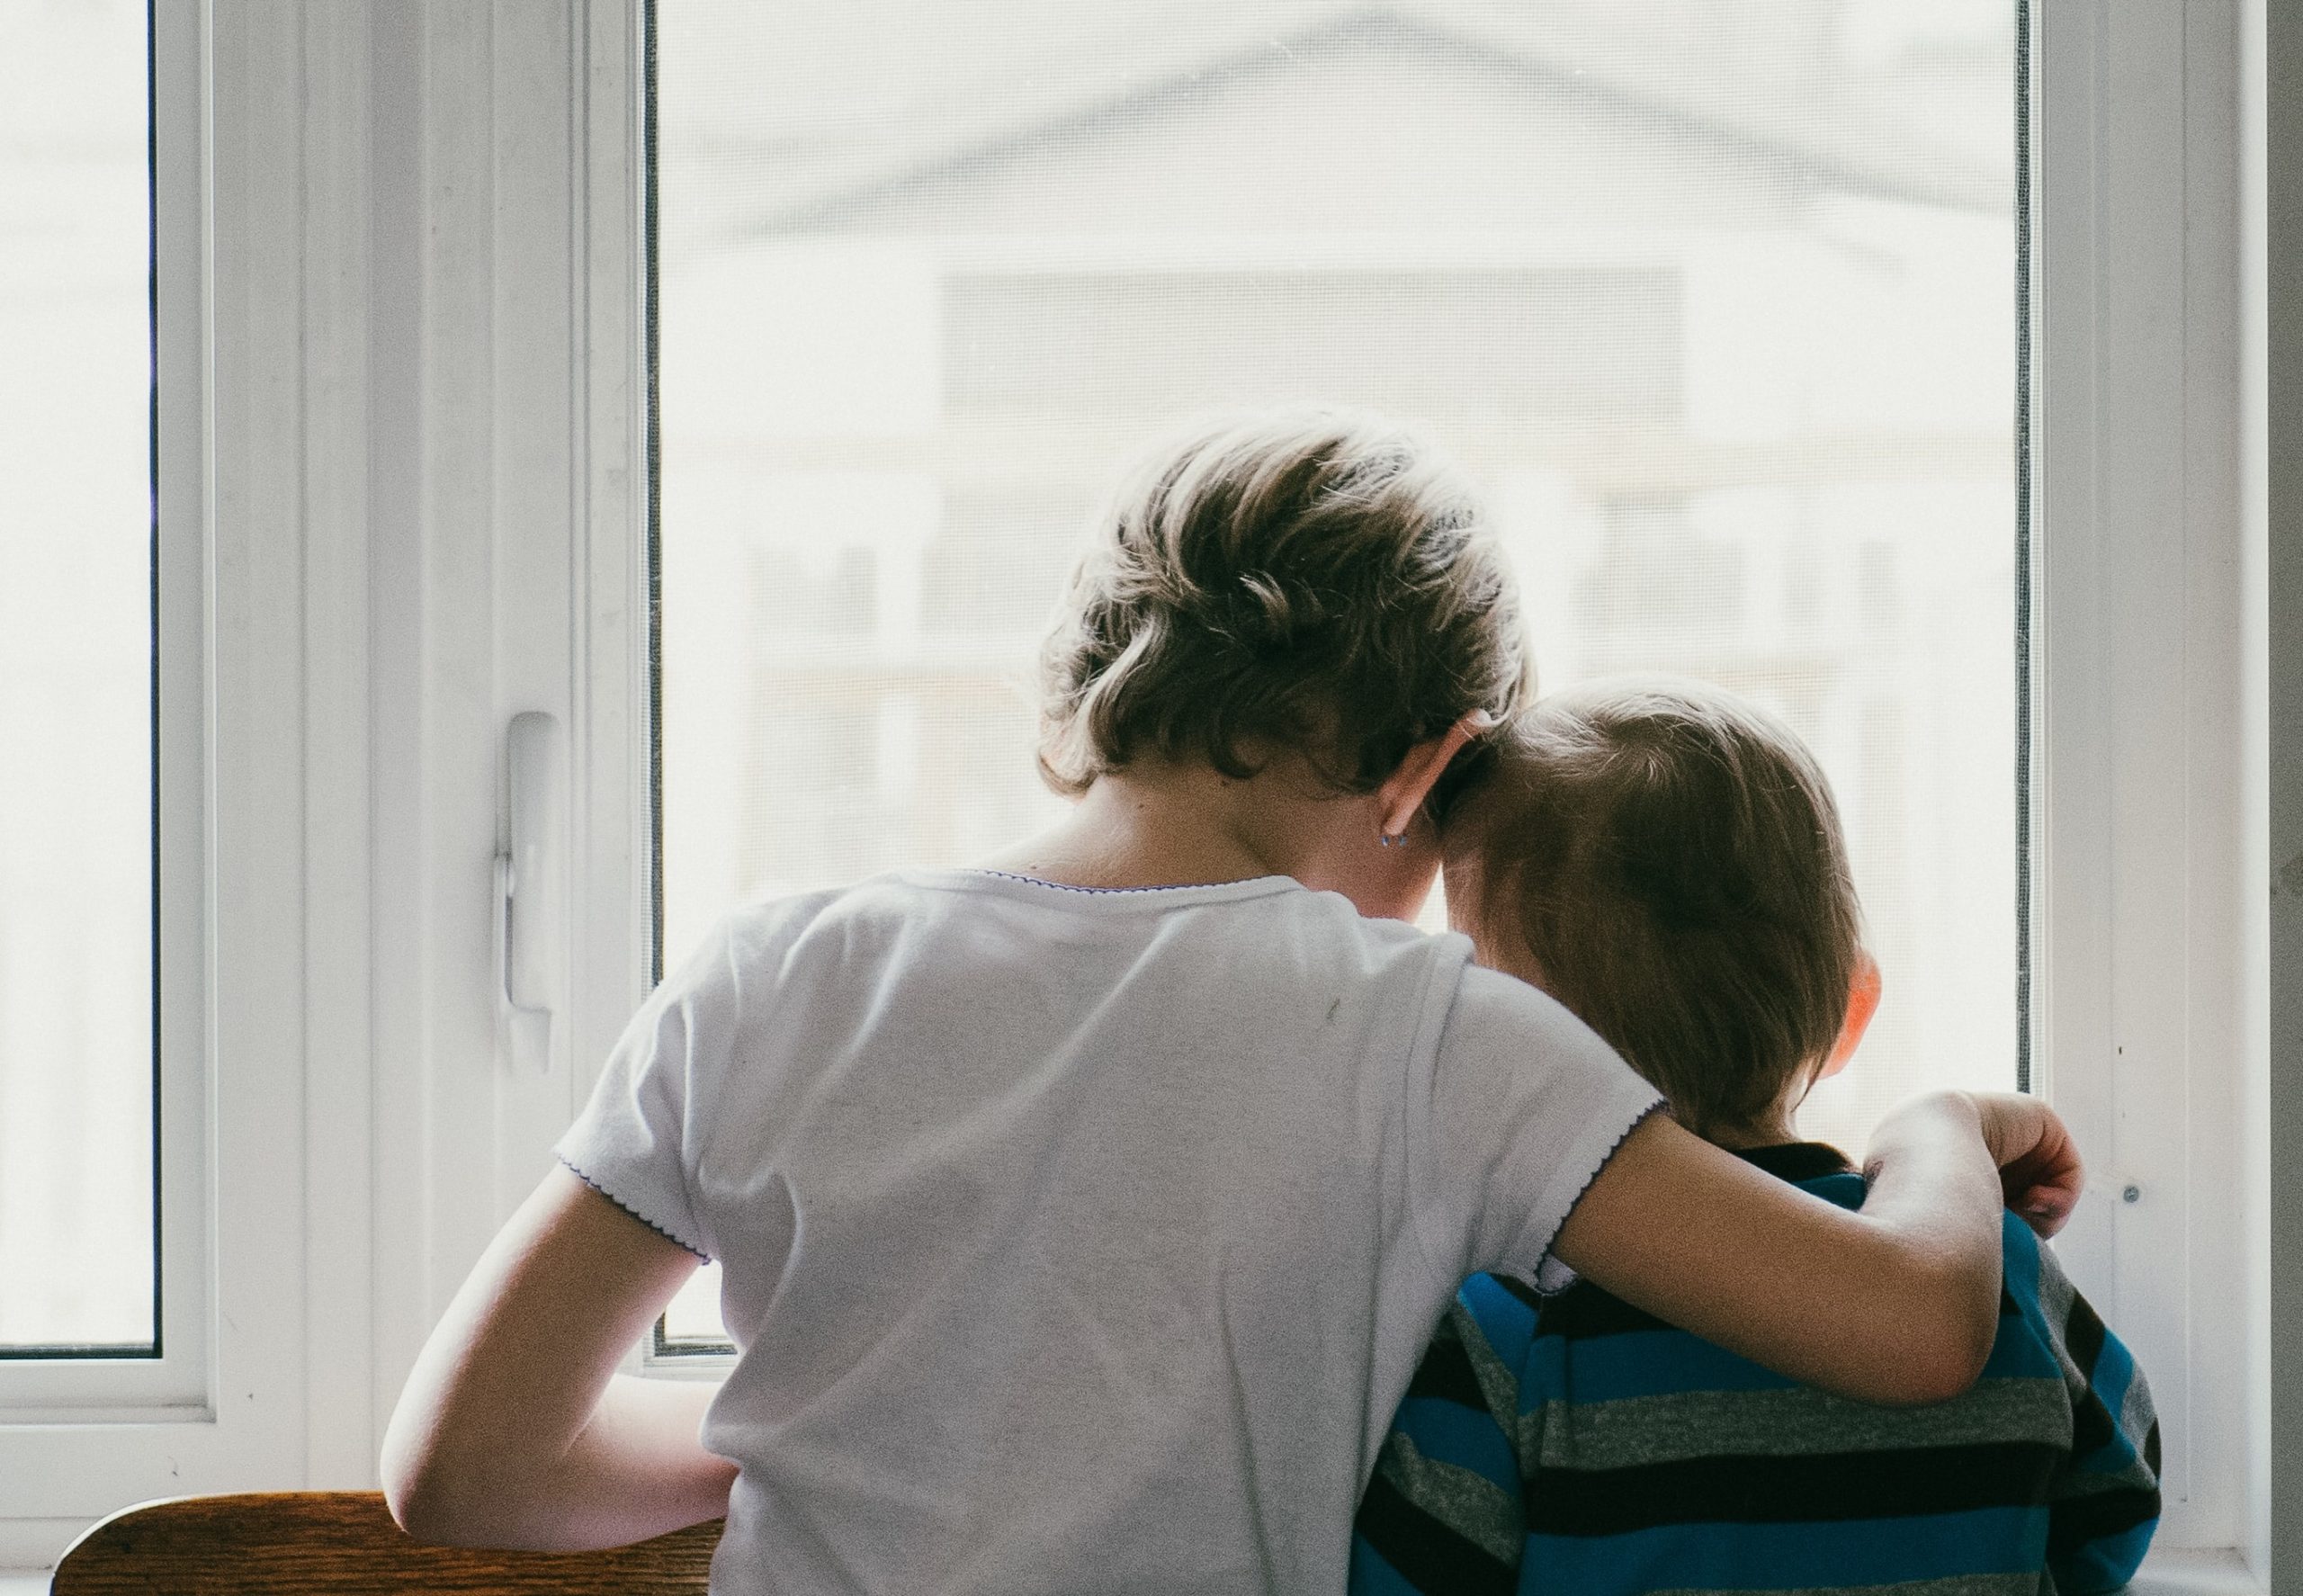 Two children looking out a window (credit Jess Zoerb via Unsplash)